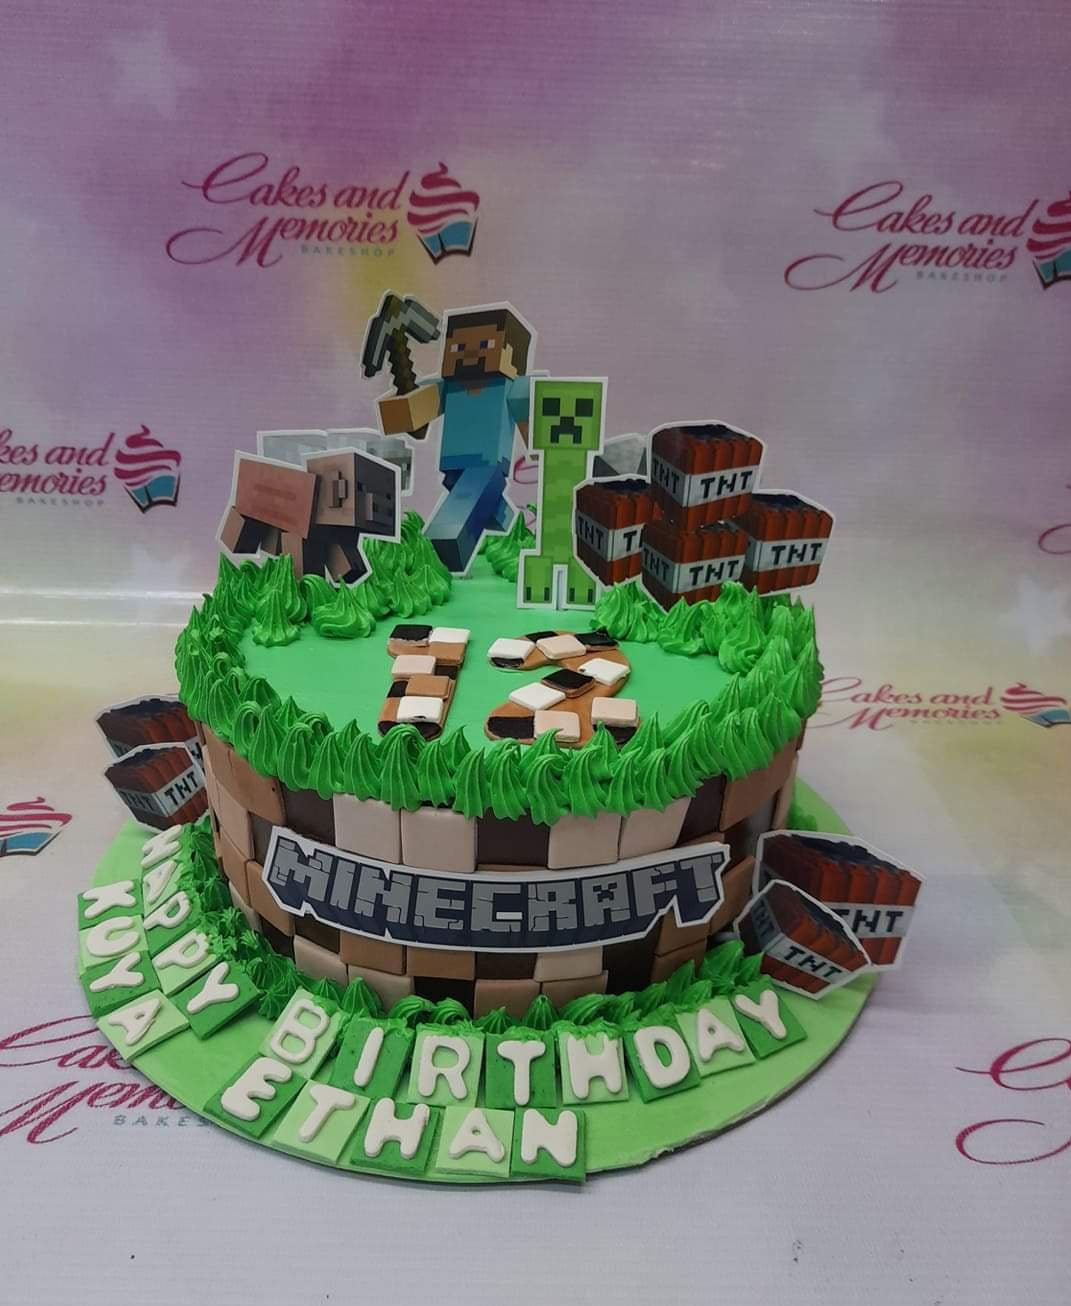 100+] Minecraft Cakes Pictures | Wallpapers.com